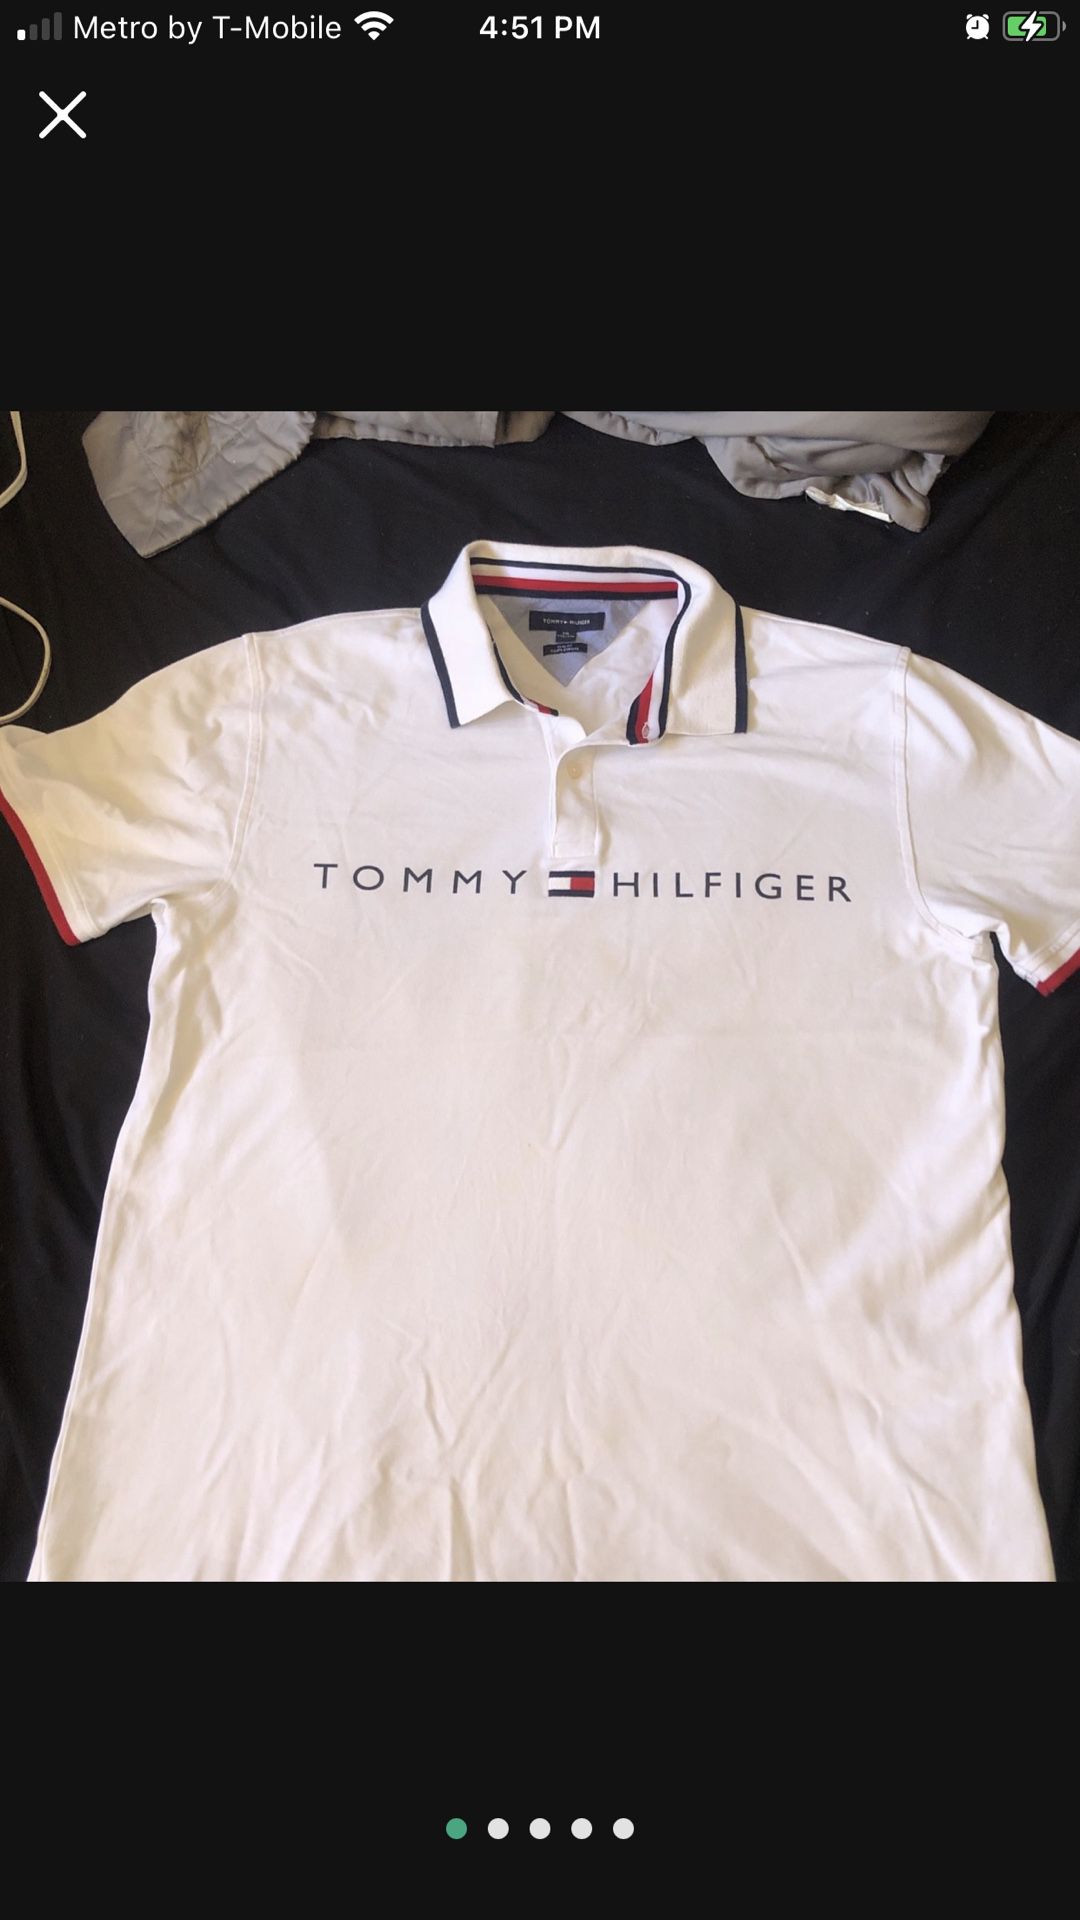 XXL Tommy Hilfiger Polo Shirt /Camisa Polo Tommy Hilfiger Sale in West Covina, CA - OfferUp